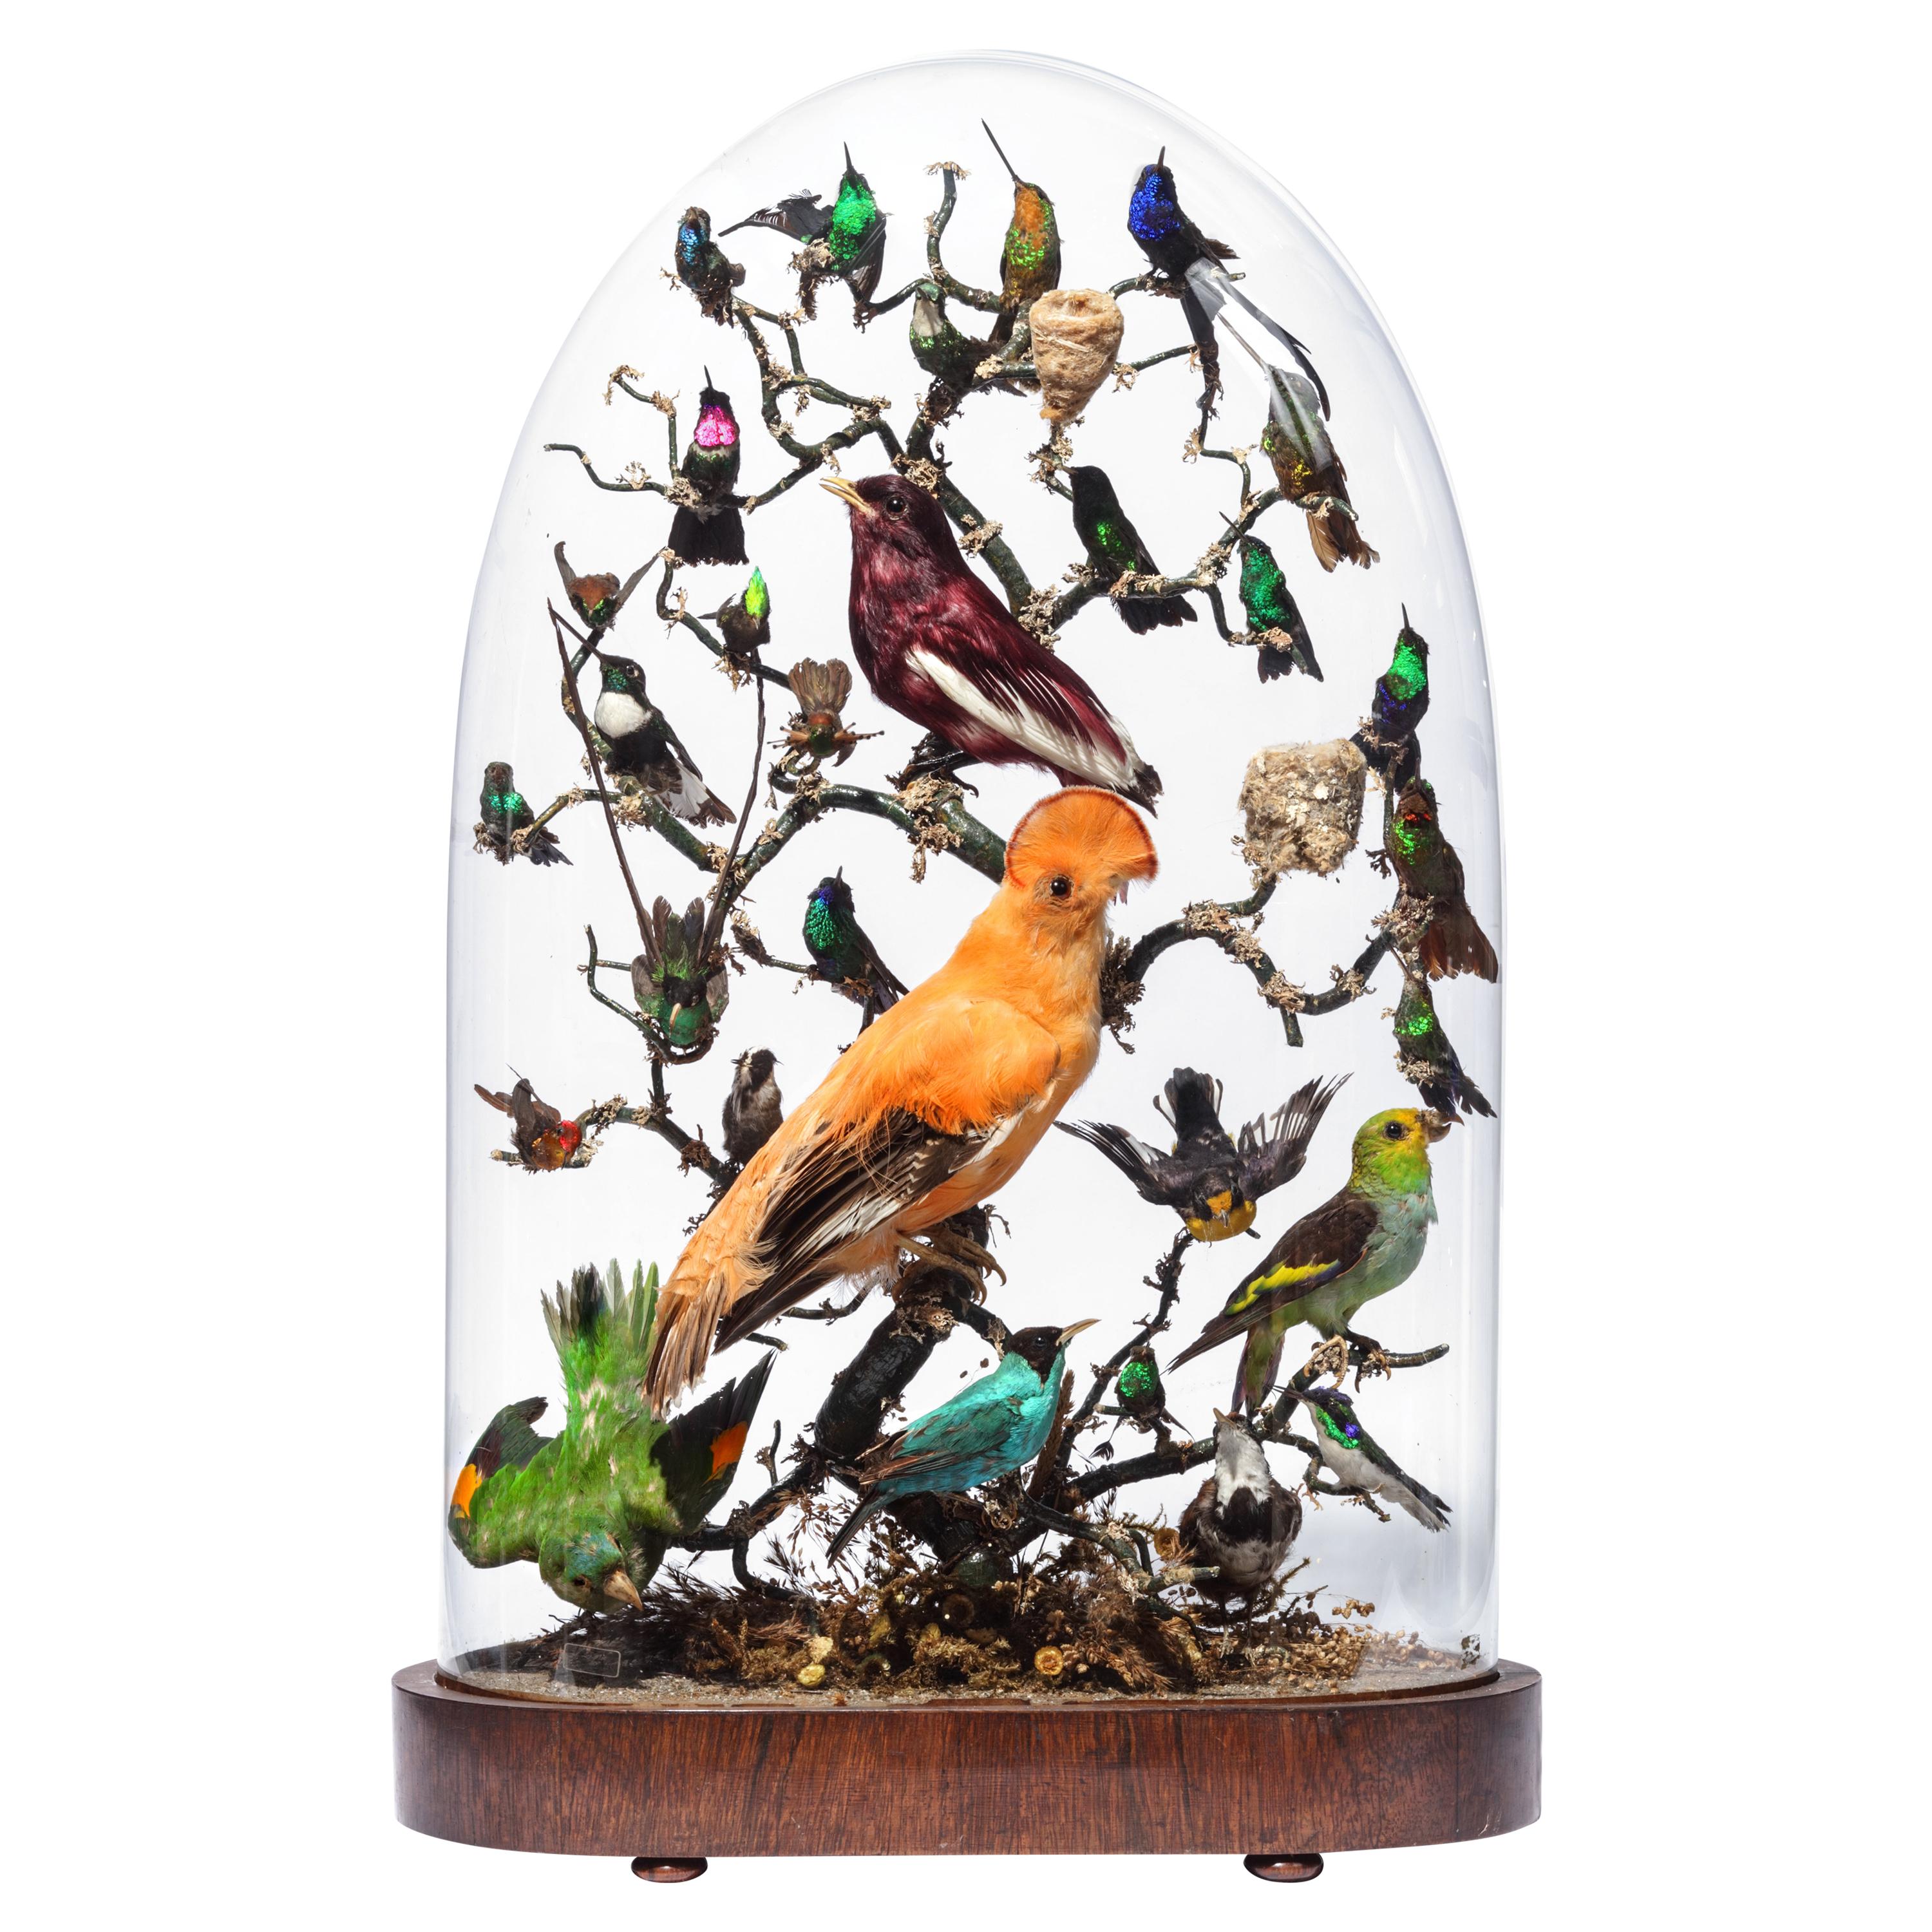 Extremely Fine Victorian Dome Taxidermy with Central-American Birds 19th Century